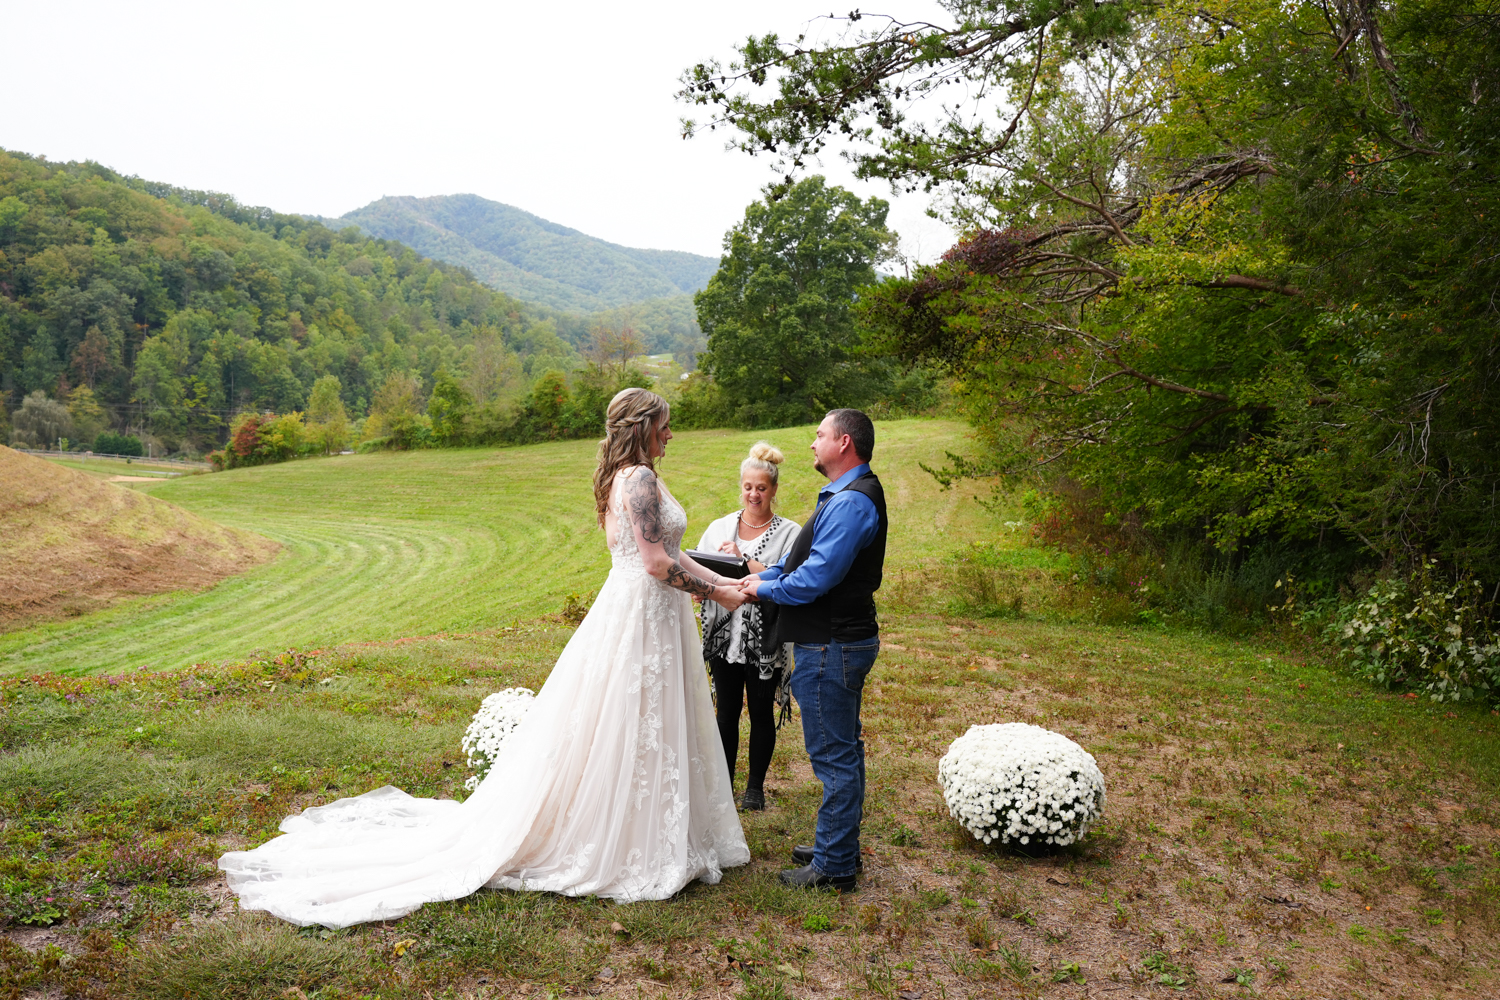 Regina Starkey officiating a wedding at the mountain view site of her family farm wedding venue called Honeysuckle Hills